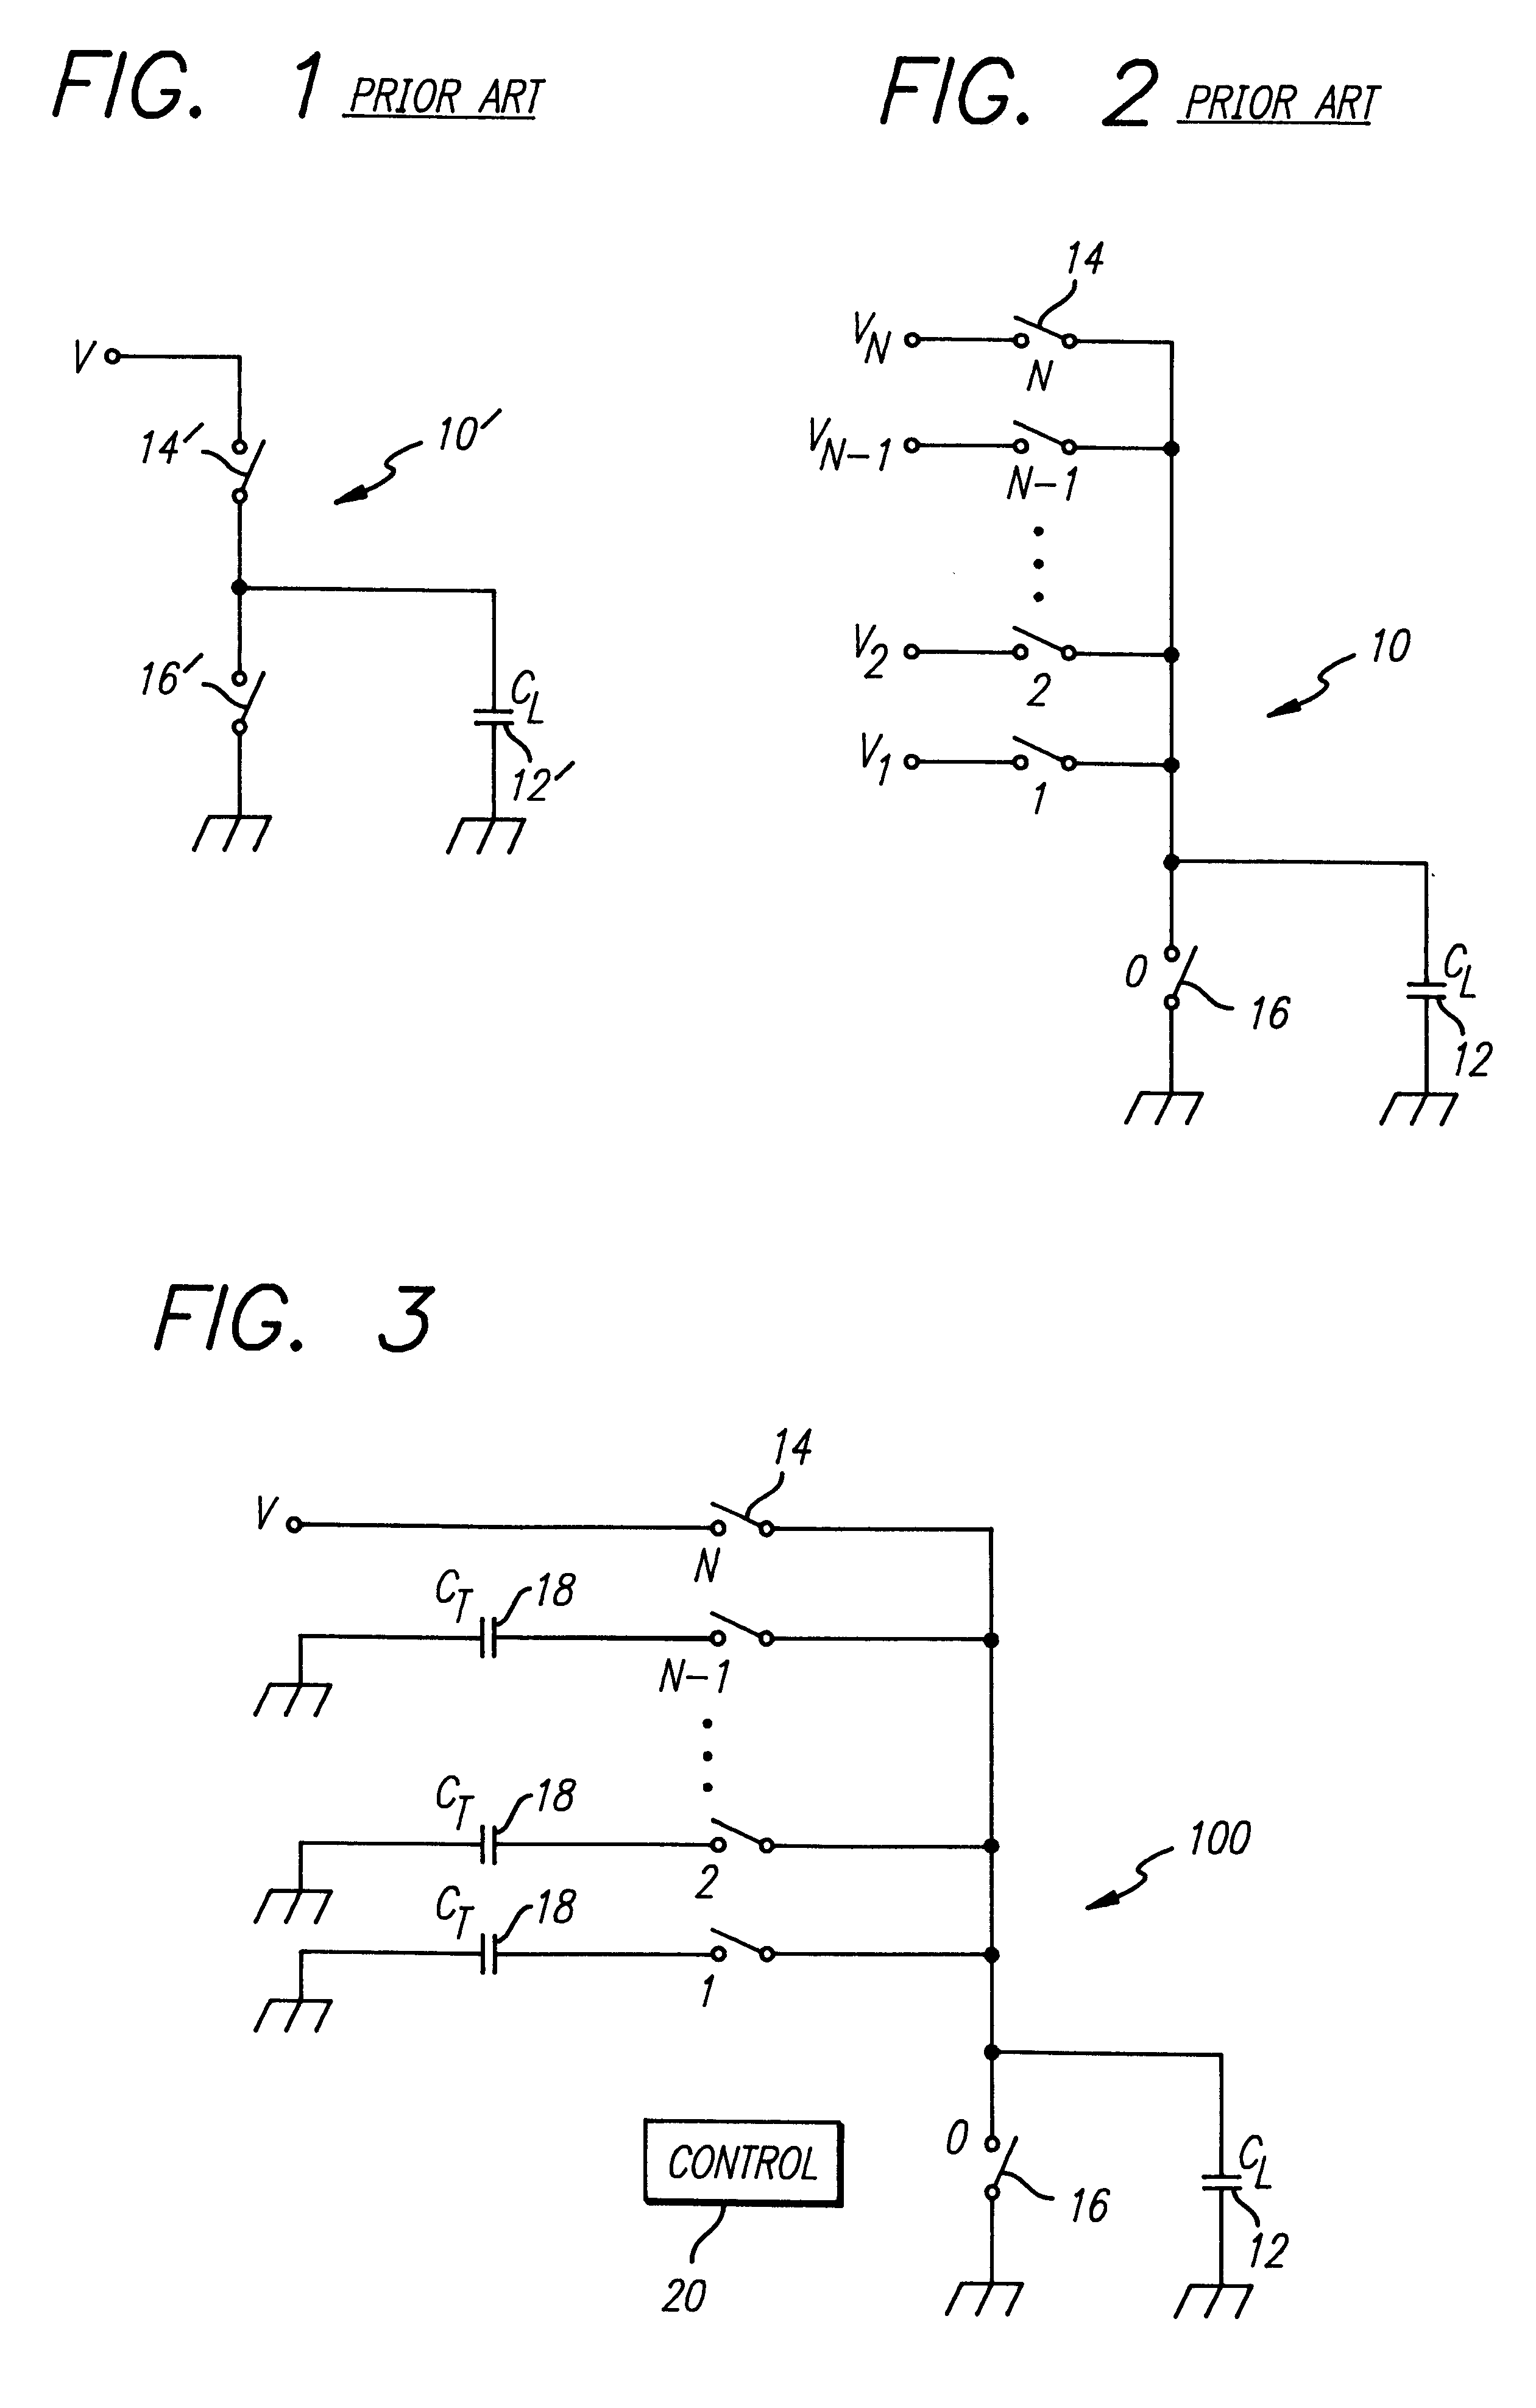 System and method for power-efficient charging and discharging of a capacitive load from a single source